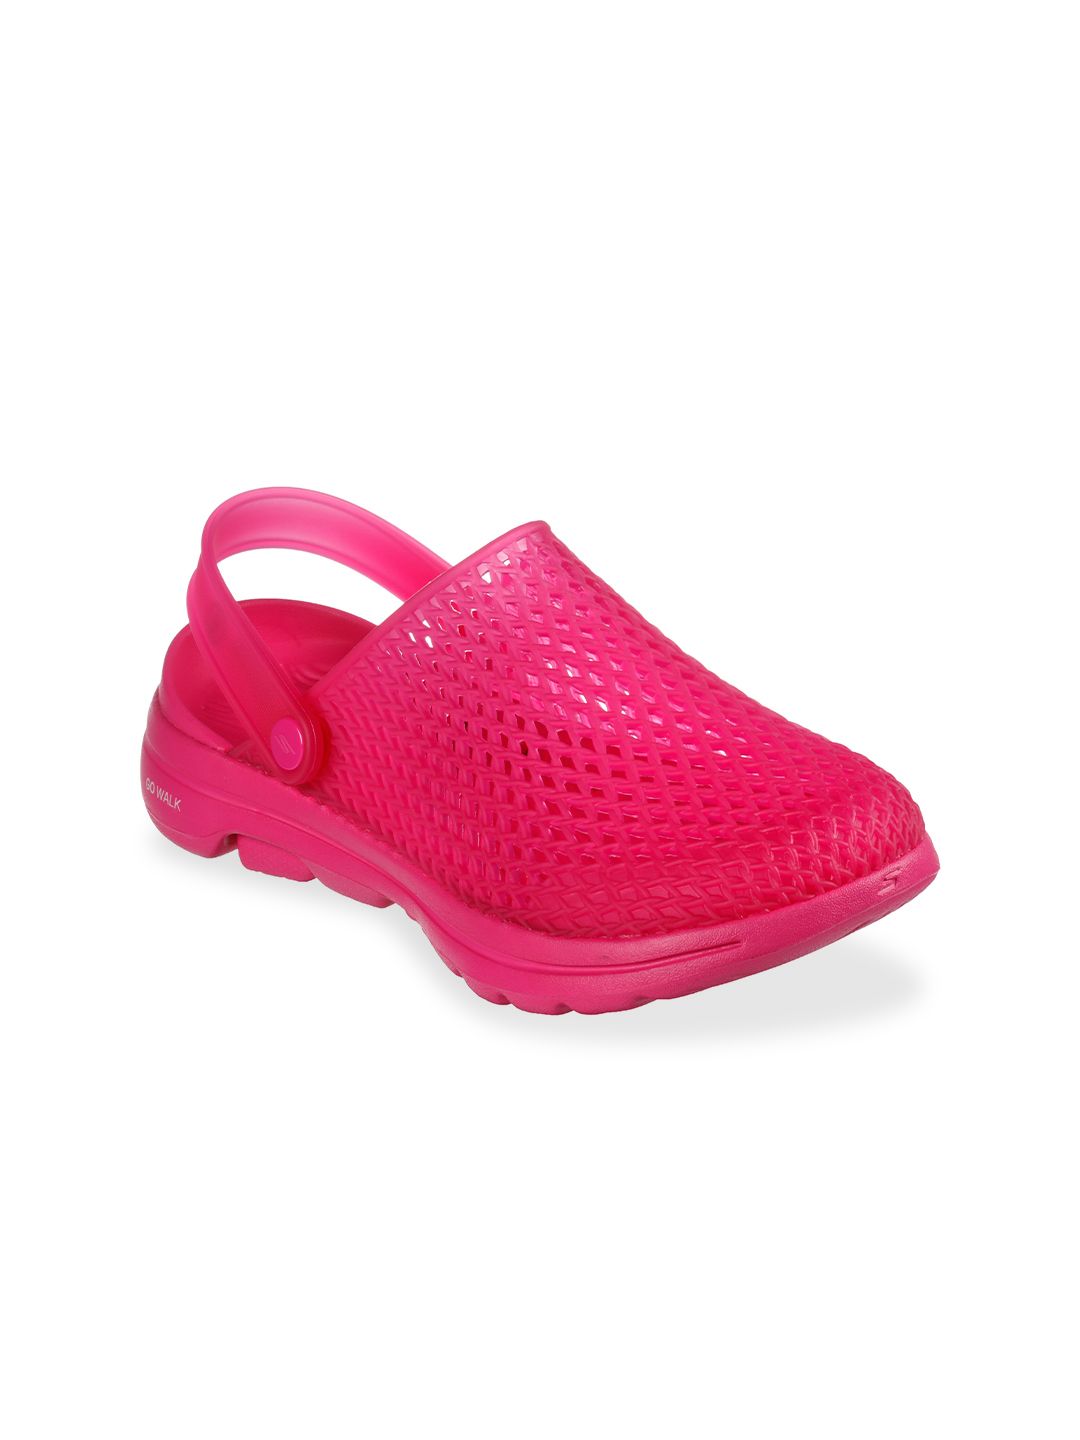 Skechers Women Pink Perforations Clogs Price in India